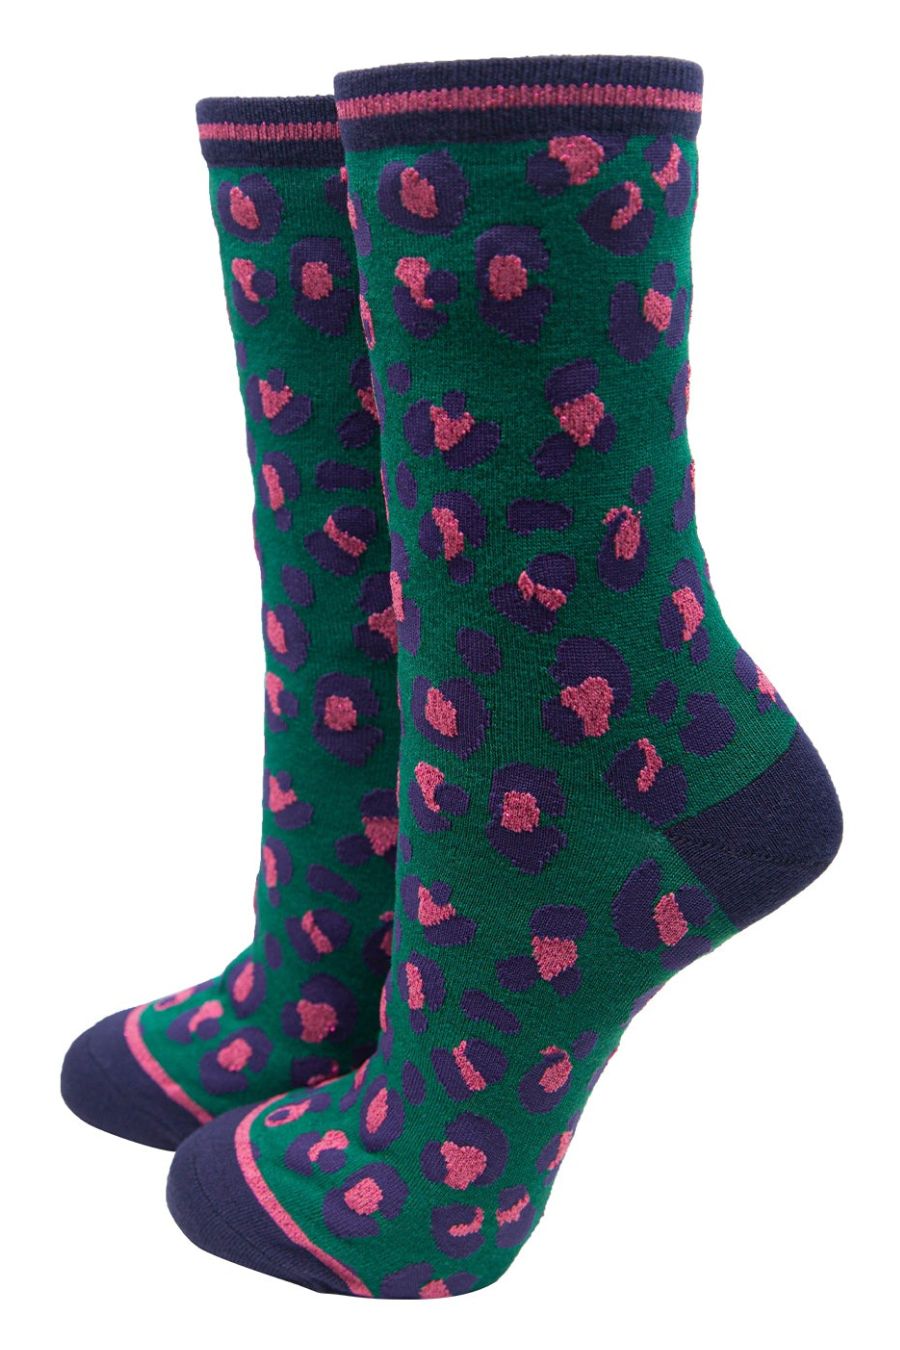 green bamboo ankle socks with an all over navy blue and pink leopard print pattern